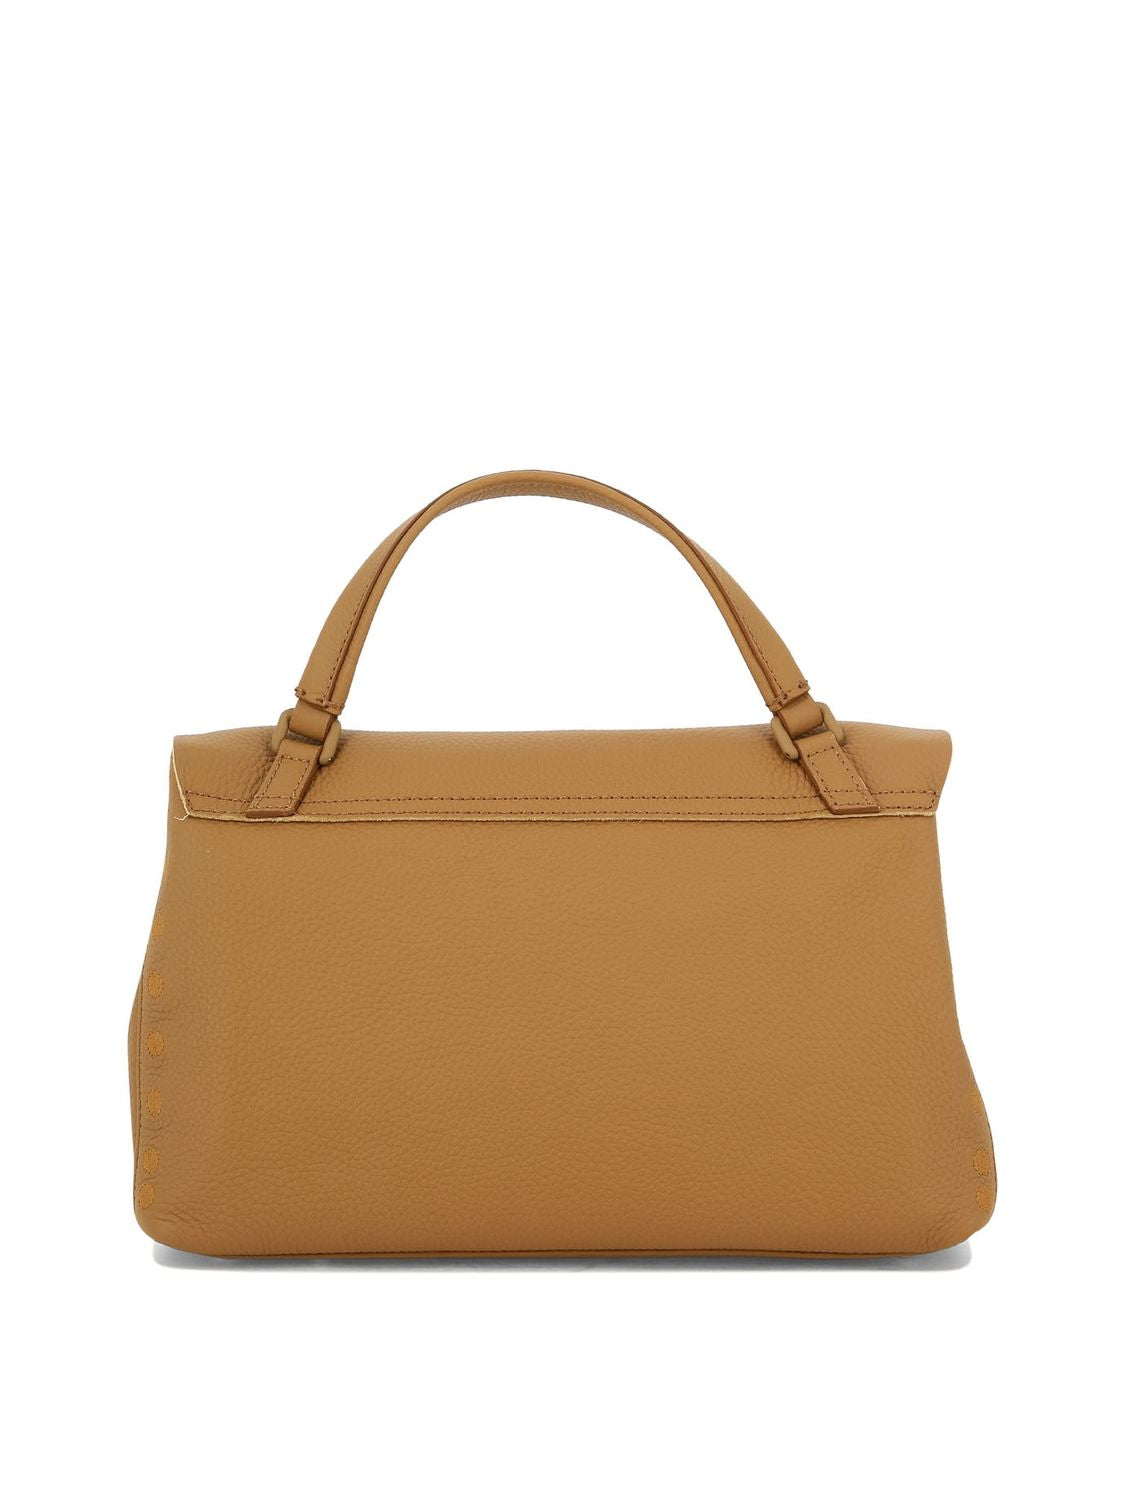 ZANELLATO Luxurious and Timeless Brown Leather Handbag for Women - FW24